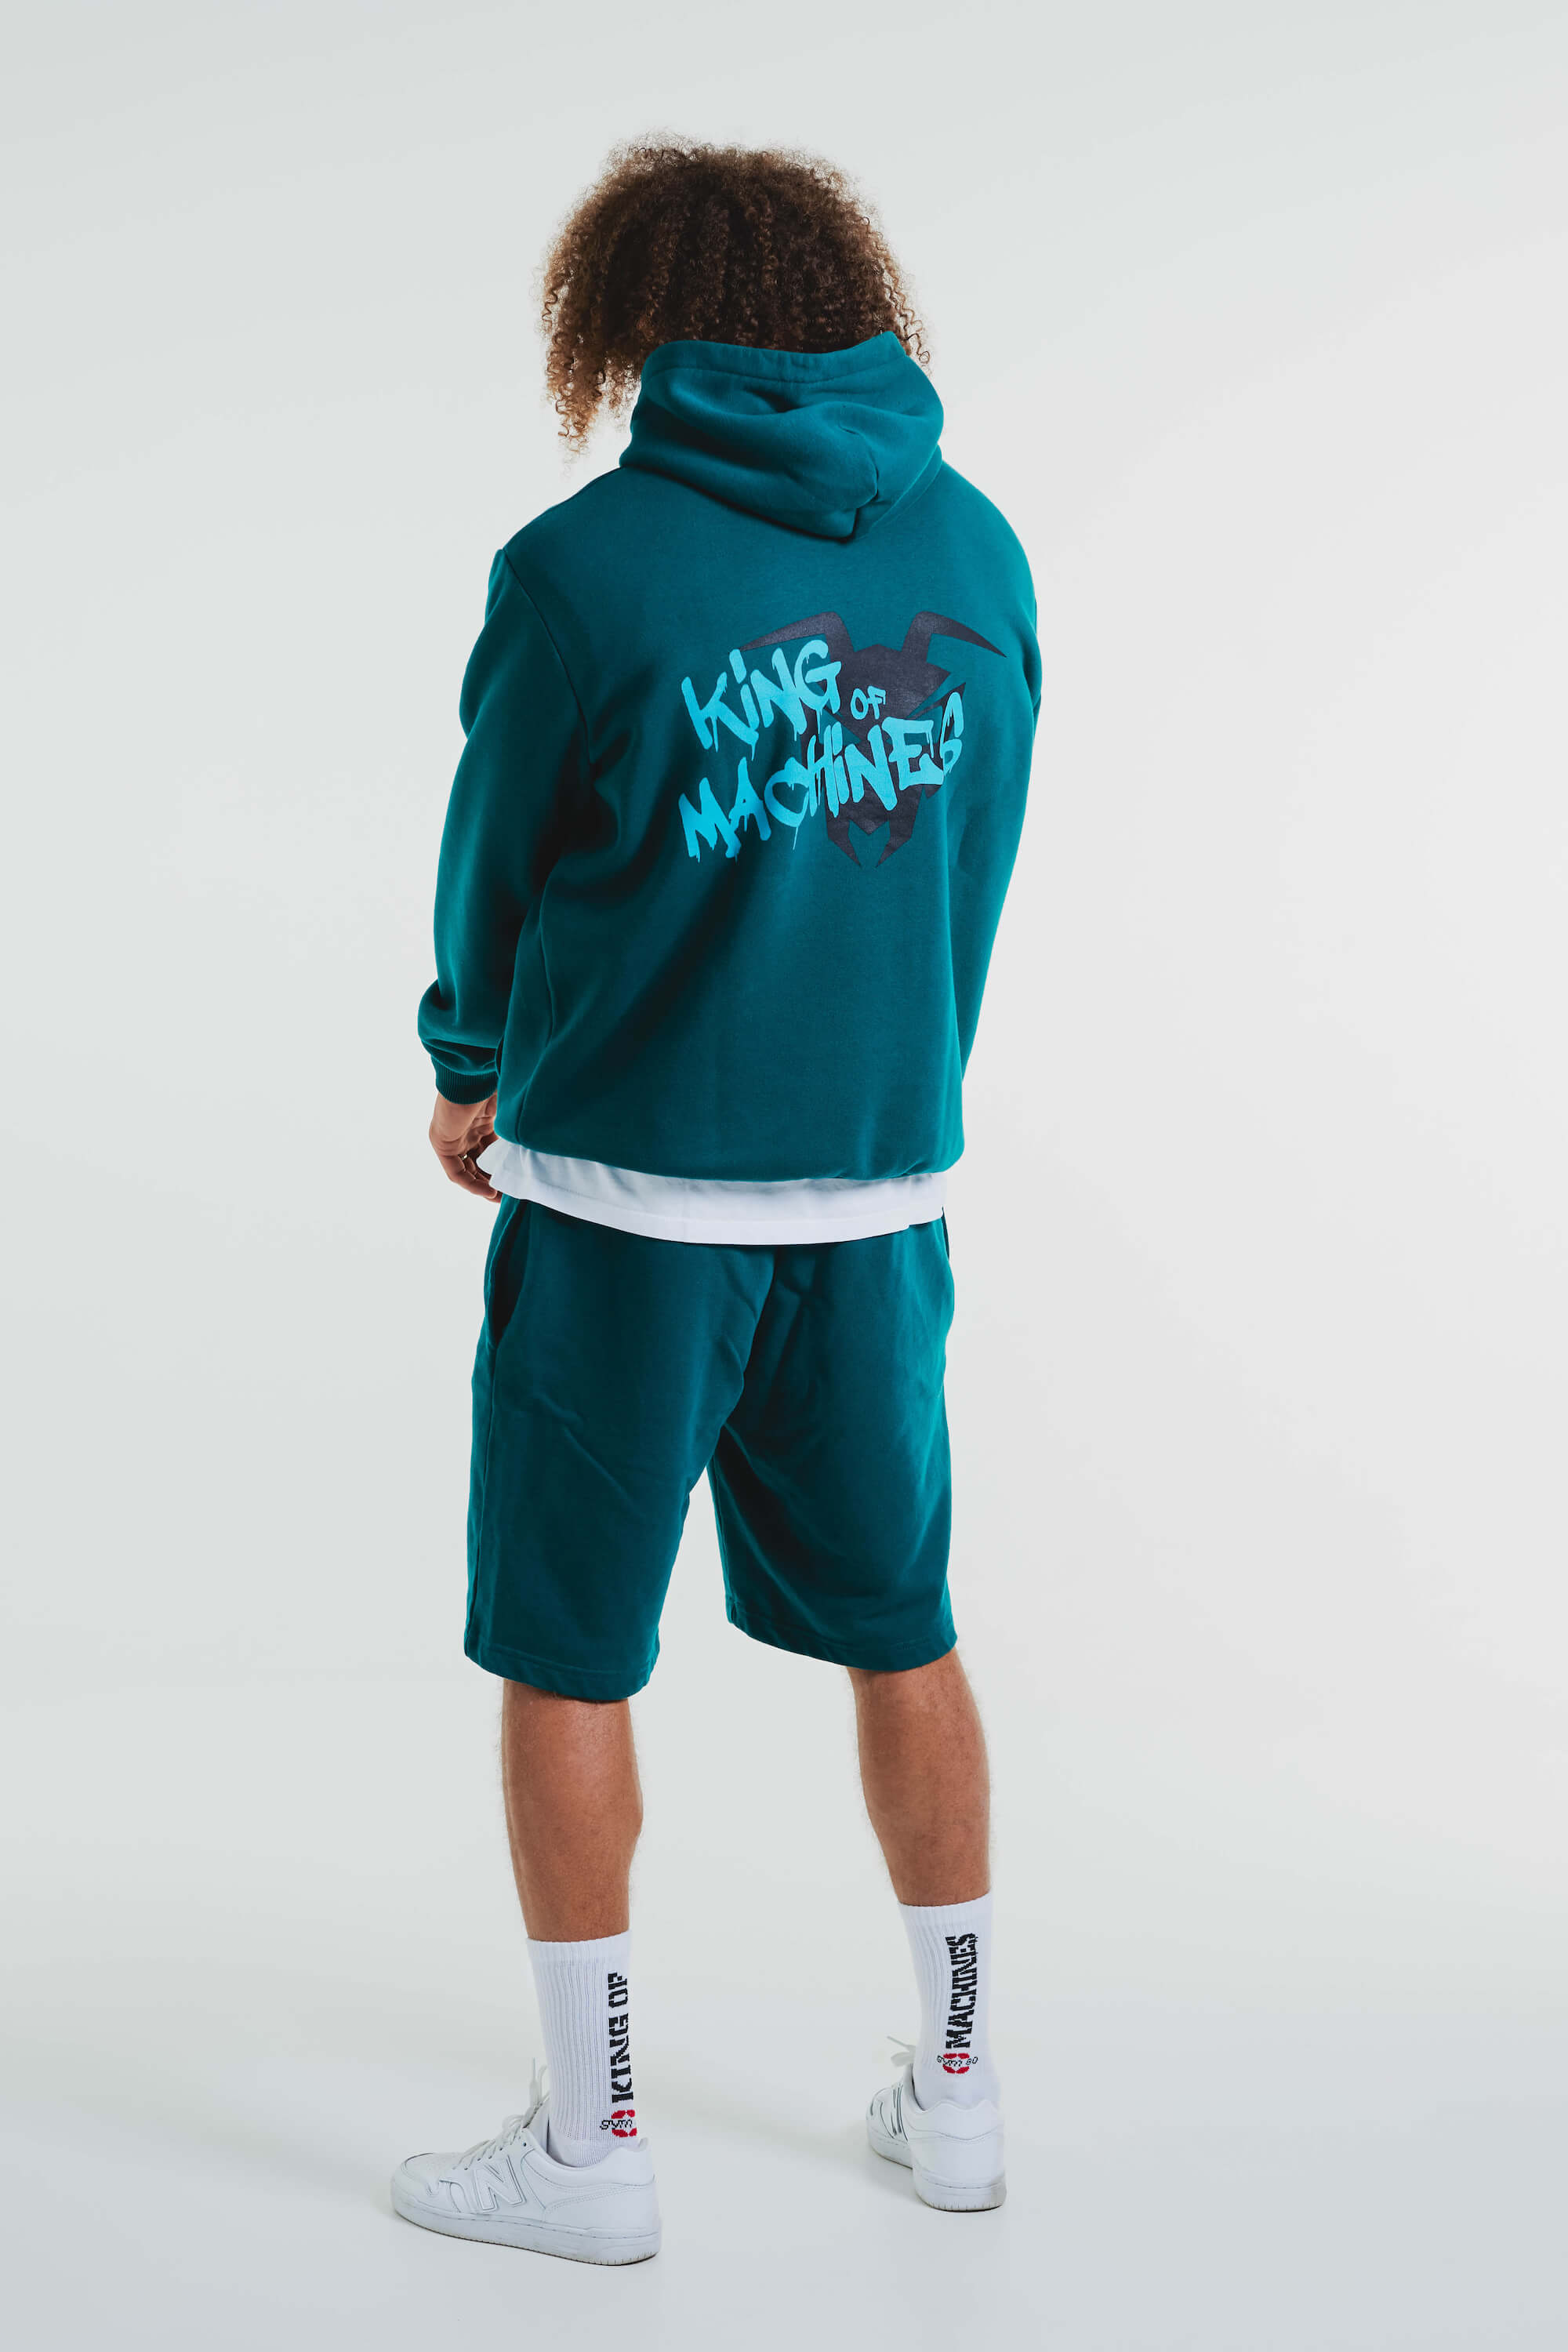 SWEAT PULLOVER  „KING OF MACHINES“ - Green